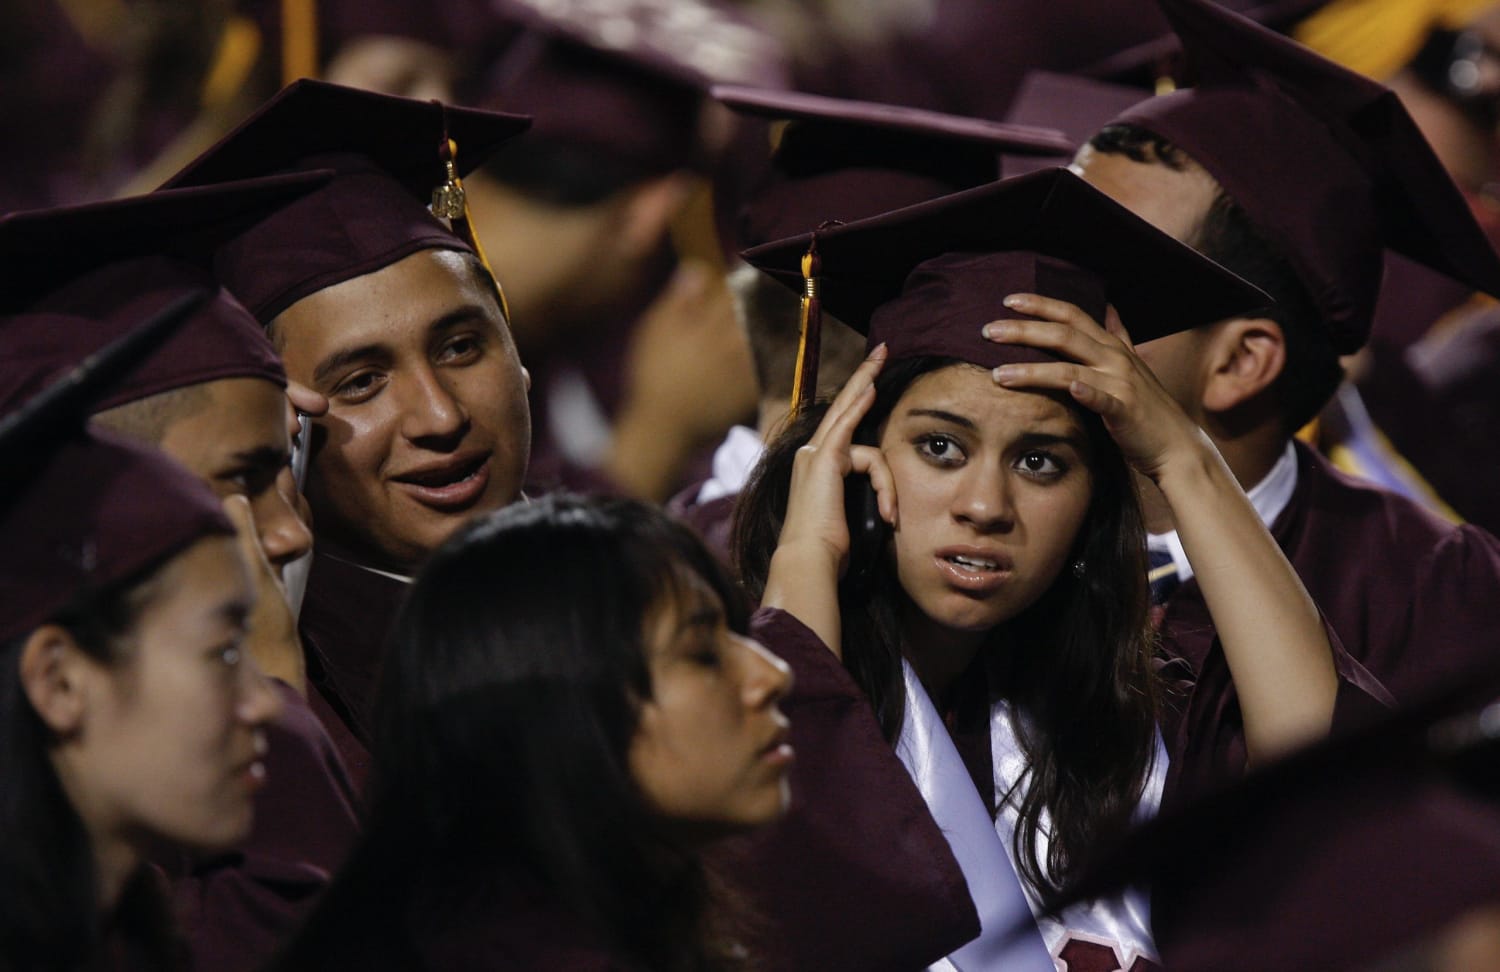 The unemployment rate for recent college graduates is getting even worse